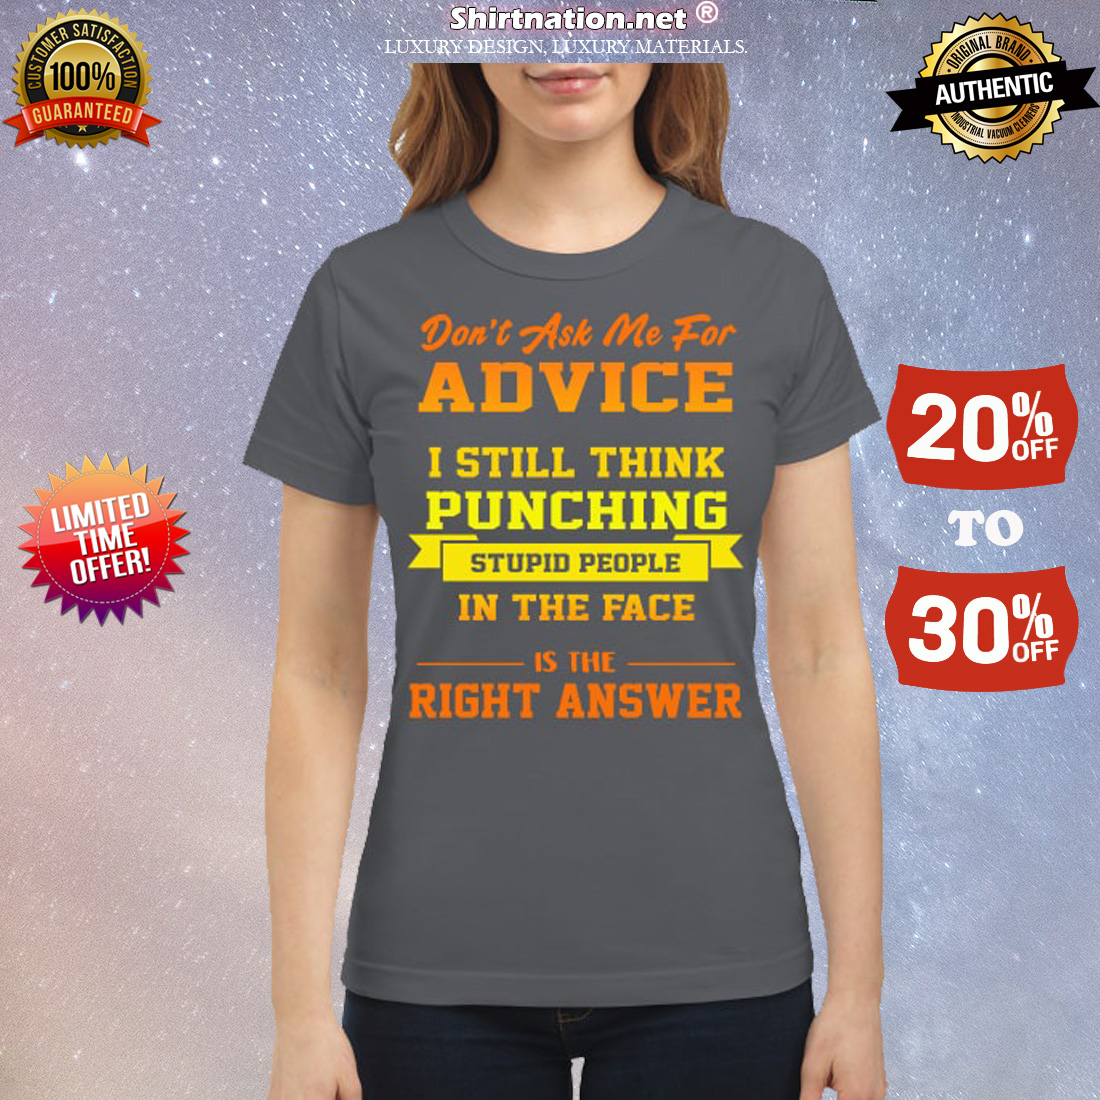 Don't ask me for advice I still think punching stupid people in the face is the right answer classic shirt